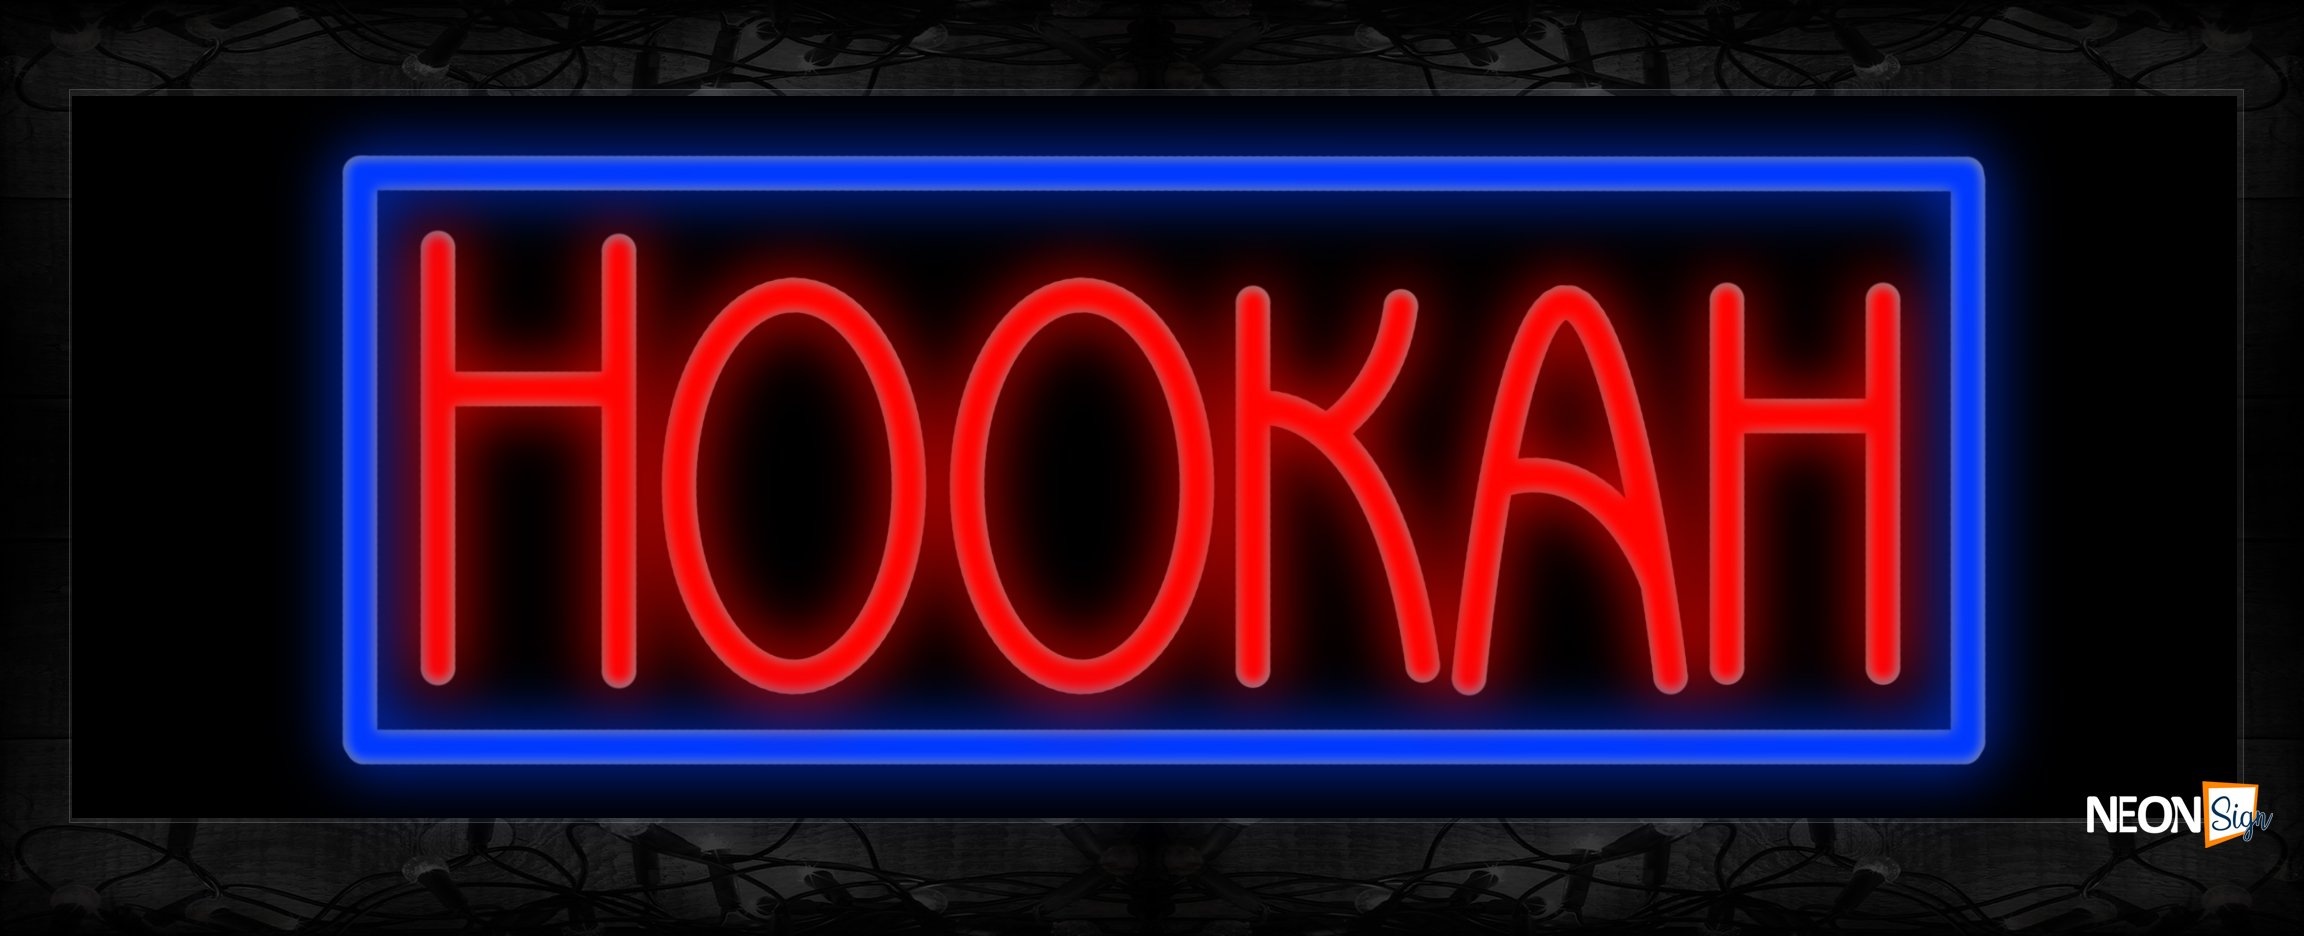 Image of 11199 Hookah in red with blue border Neon Sign 13x32 Black Backing